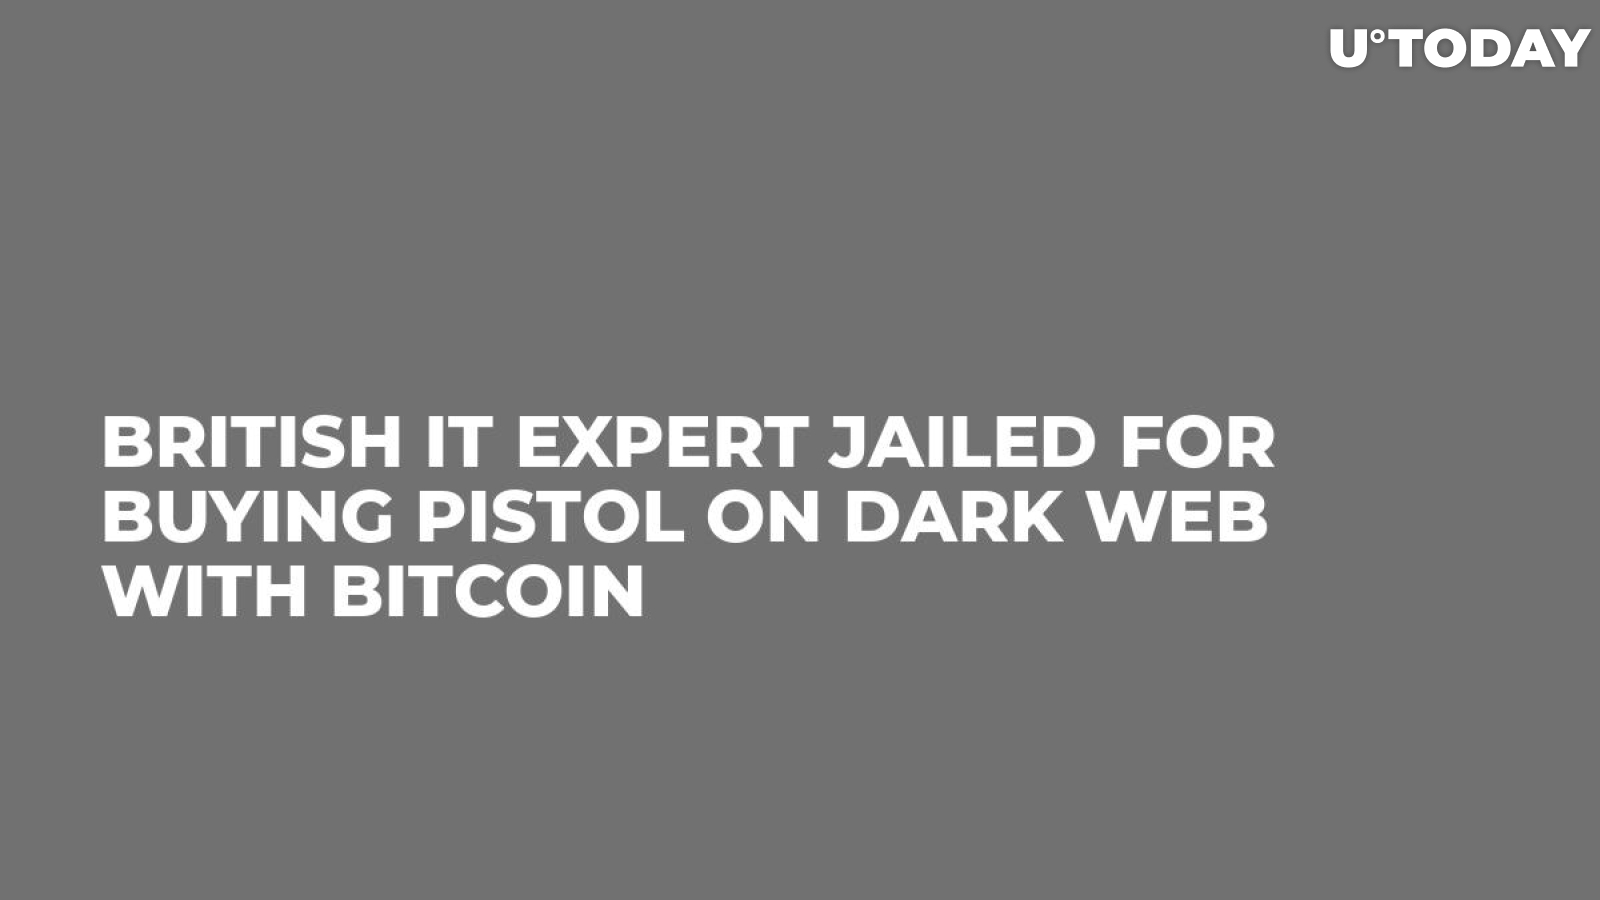 British IT Expert Jailed for Buying Pistol On Dark Web with Bitcoin